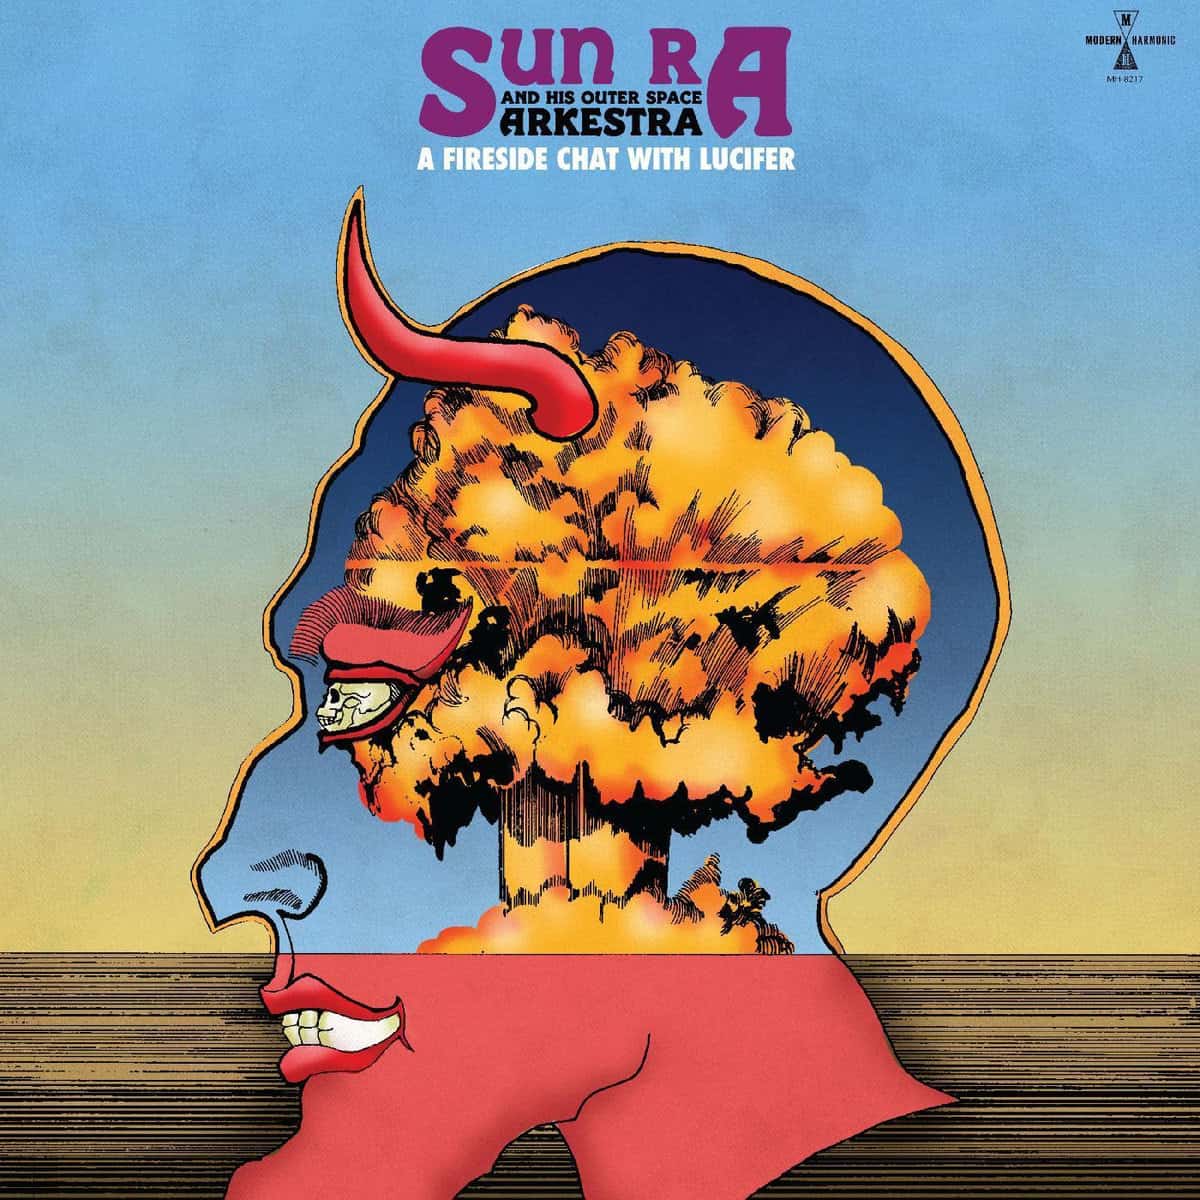 Sun Ra & His Outer Space Arkestra: A Fireside Chat With Lucifer (Vinyl LP)